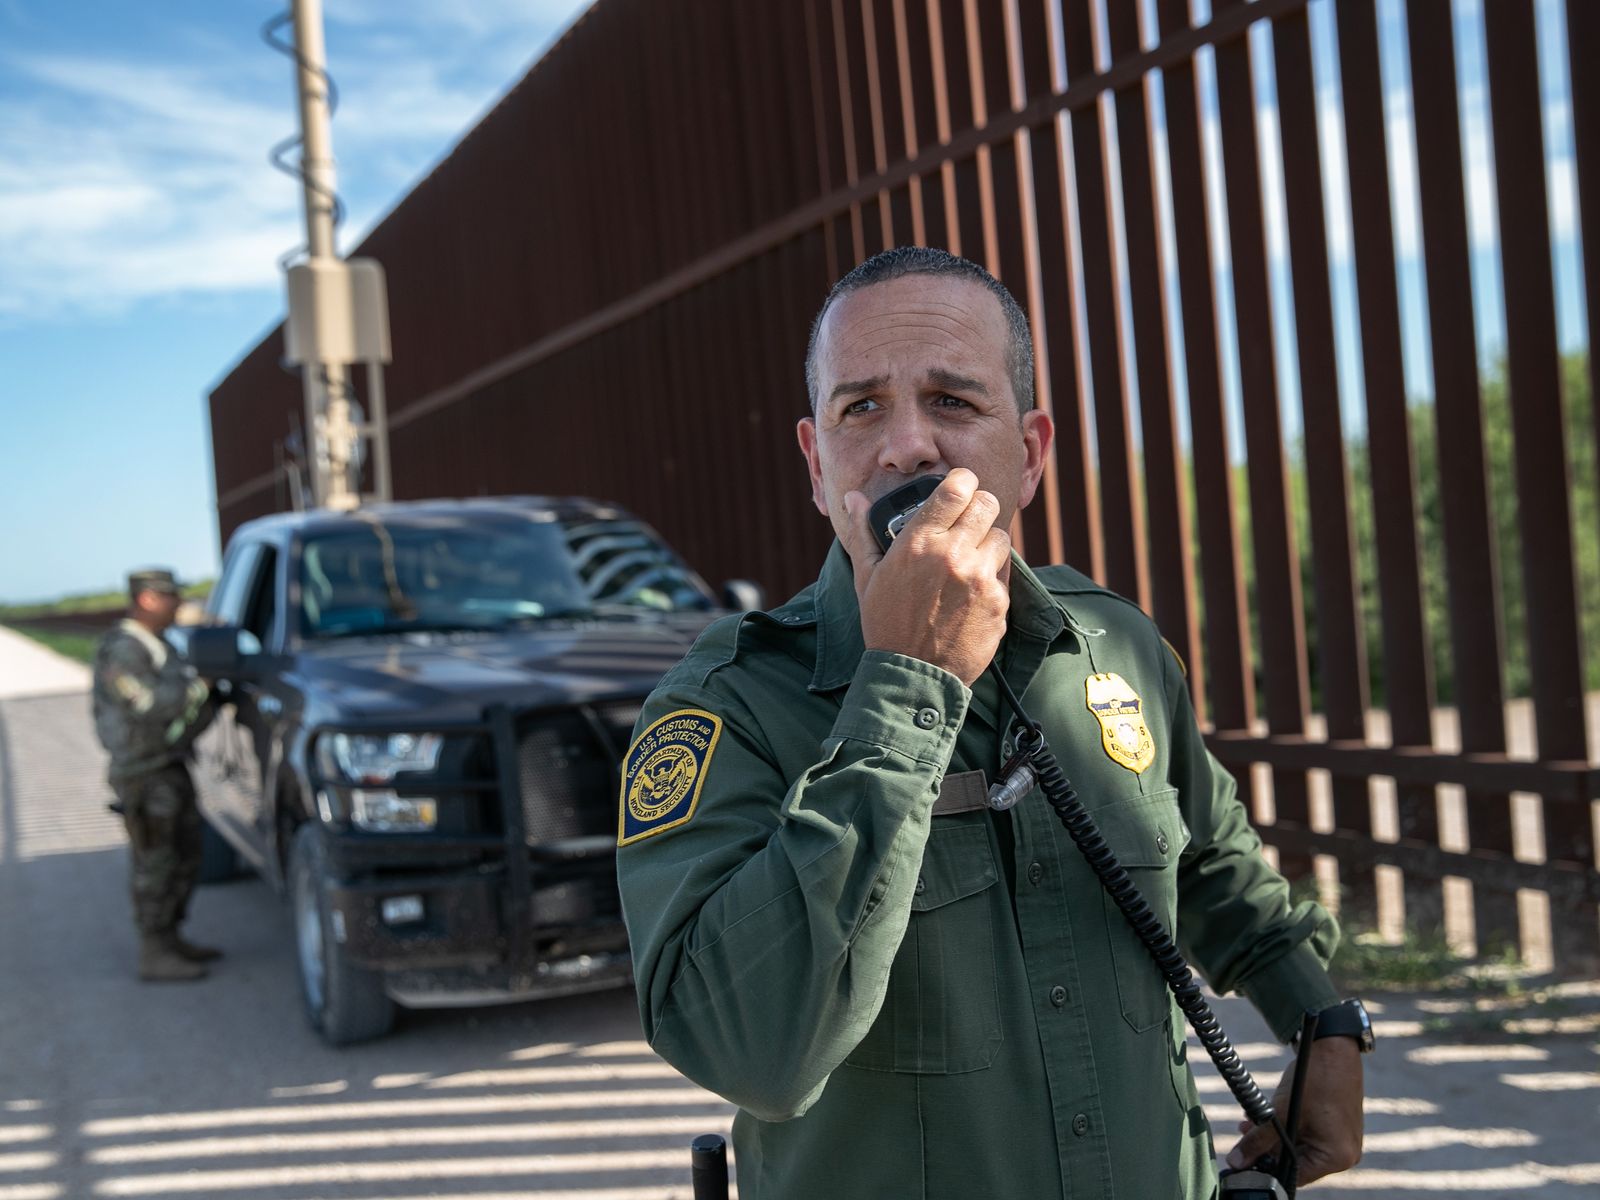 Border Patrol Agents Are Realizing People Actively Hate Us